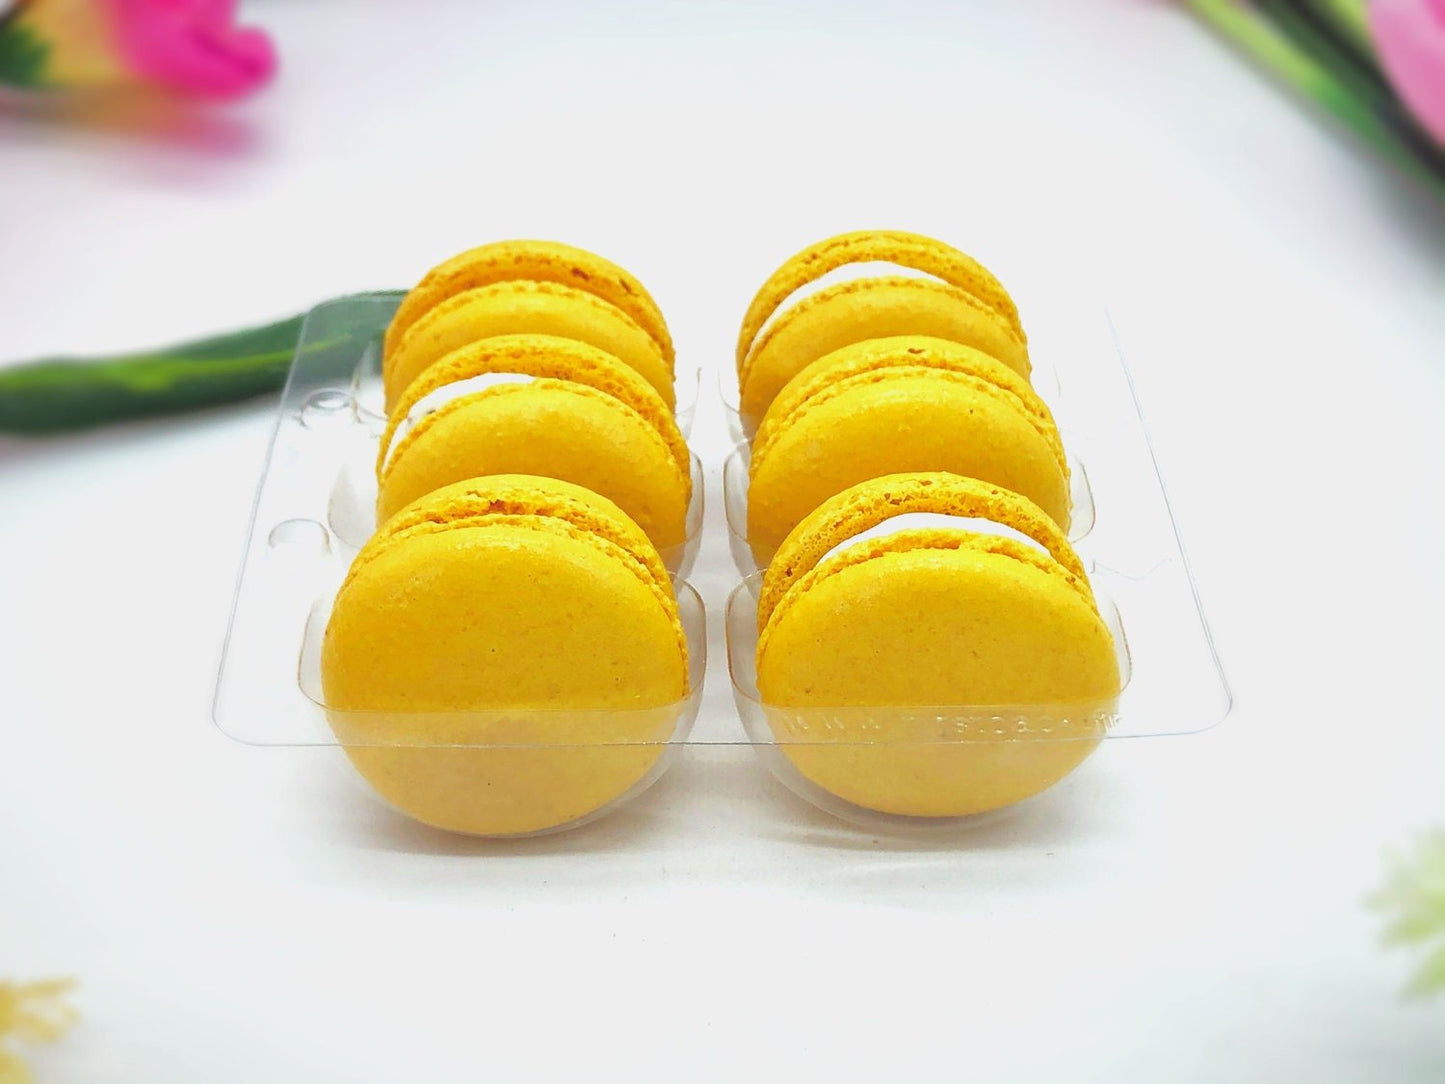 6 Pack almond overload French macarons - Macaron Centrale